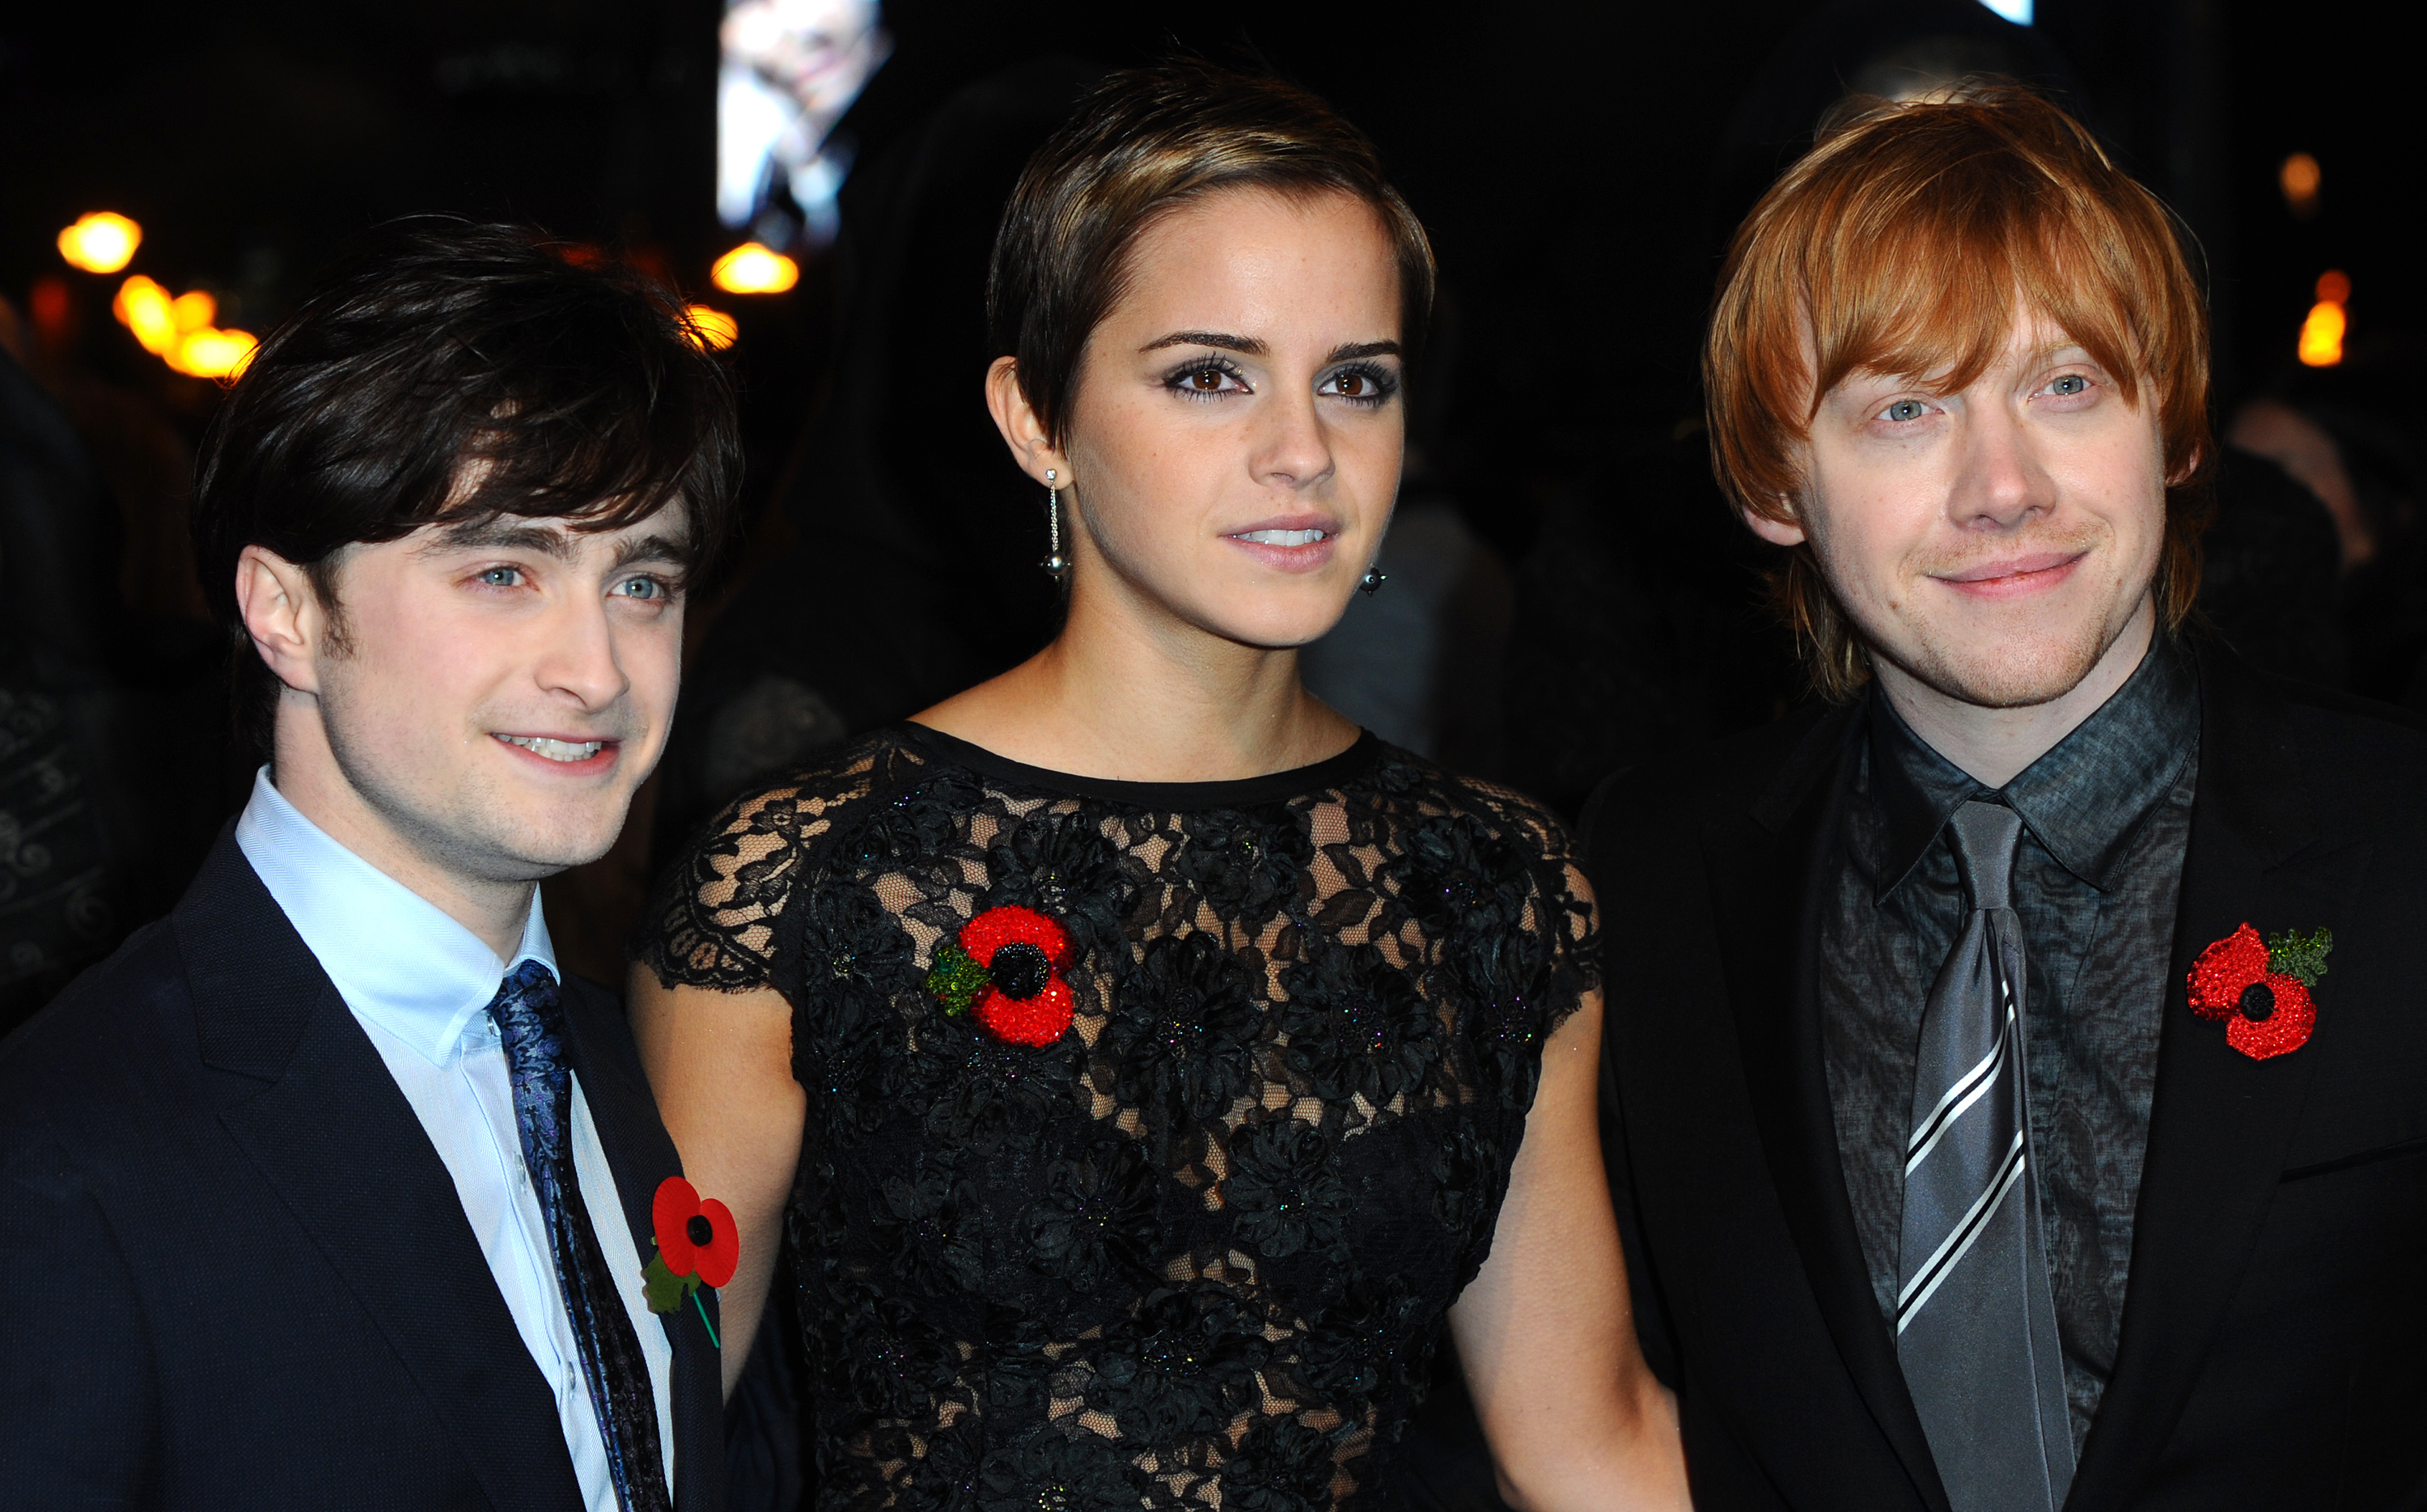 Daniel Radcliffe, Emma Watson, and Rupert Grint smiling at an event, wearing poppy pins. Emma in a lace dress, the men in suits